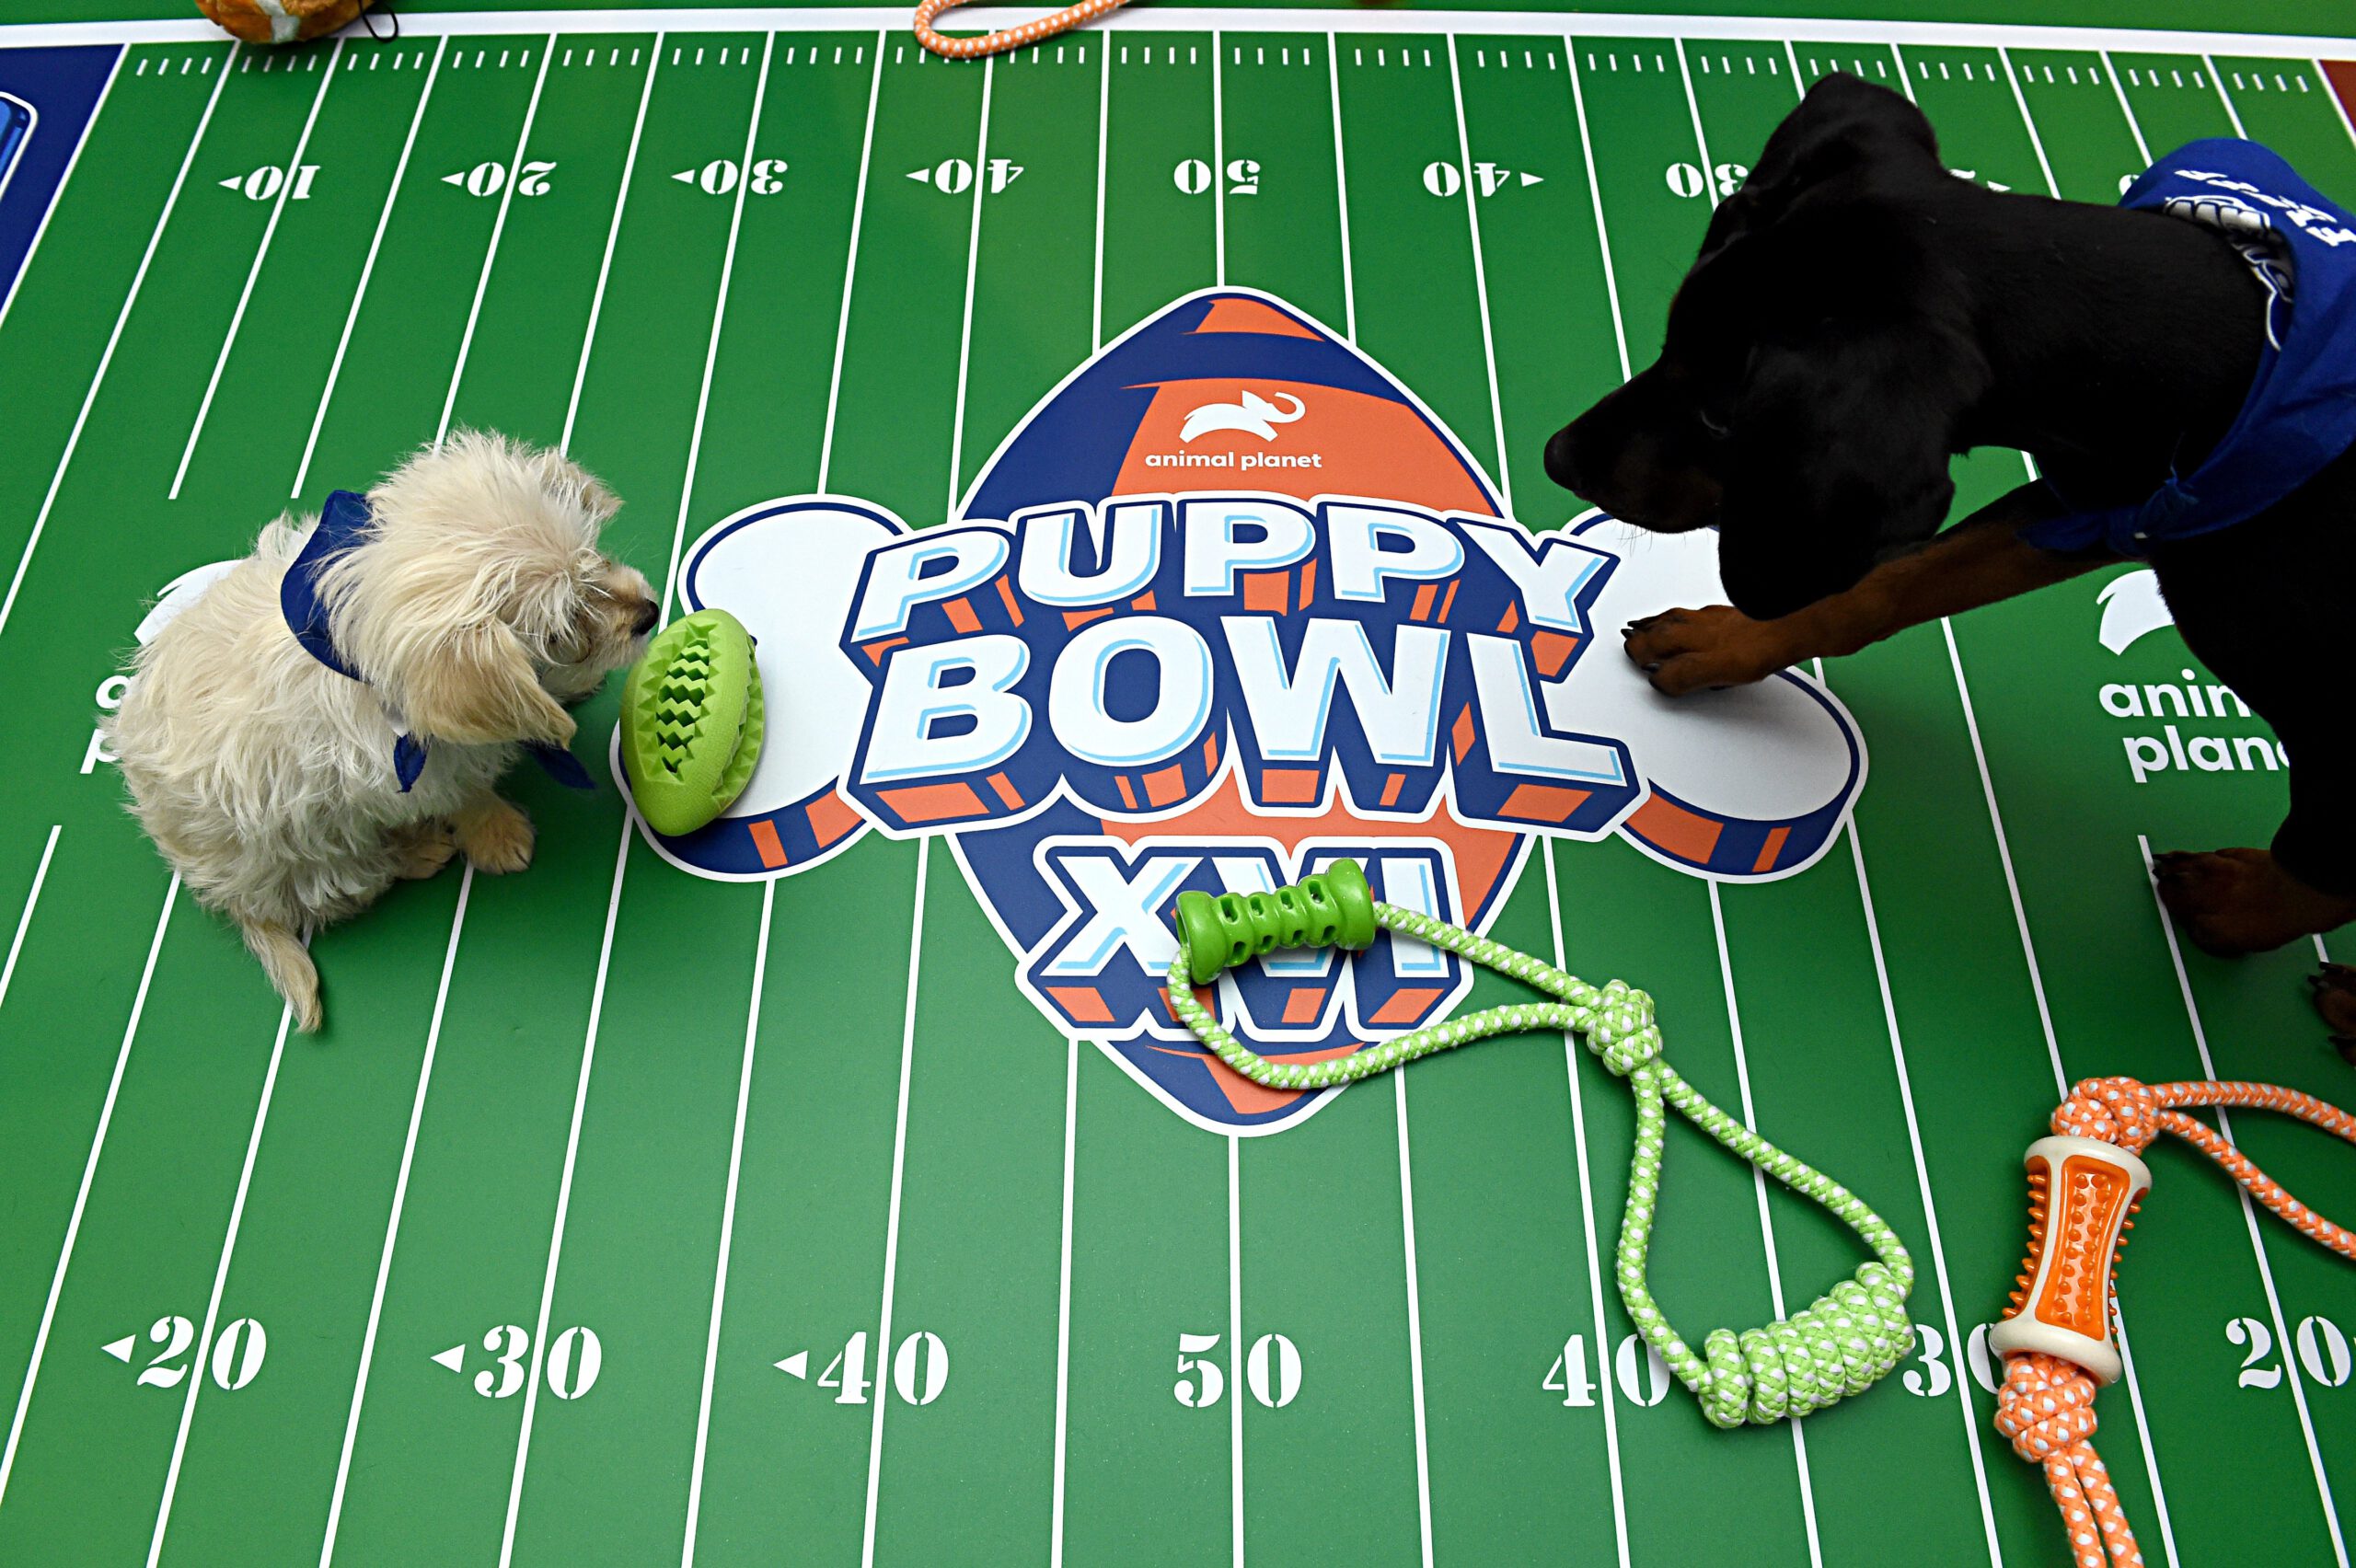 Two dogs stand on the Puppy Bowl field with the logo displayed between them.